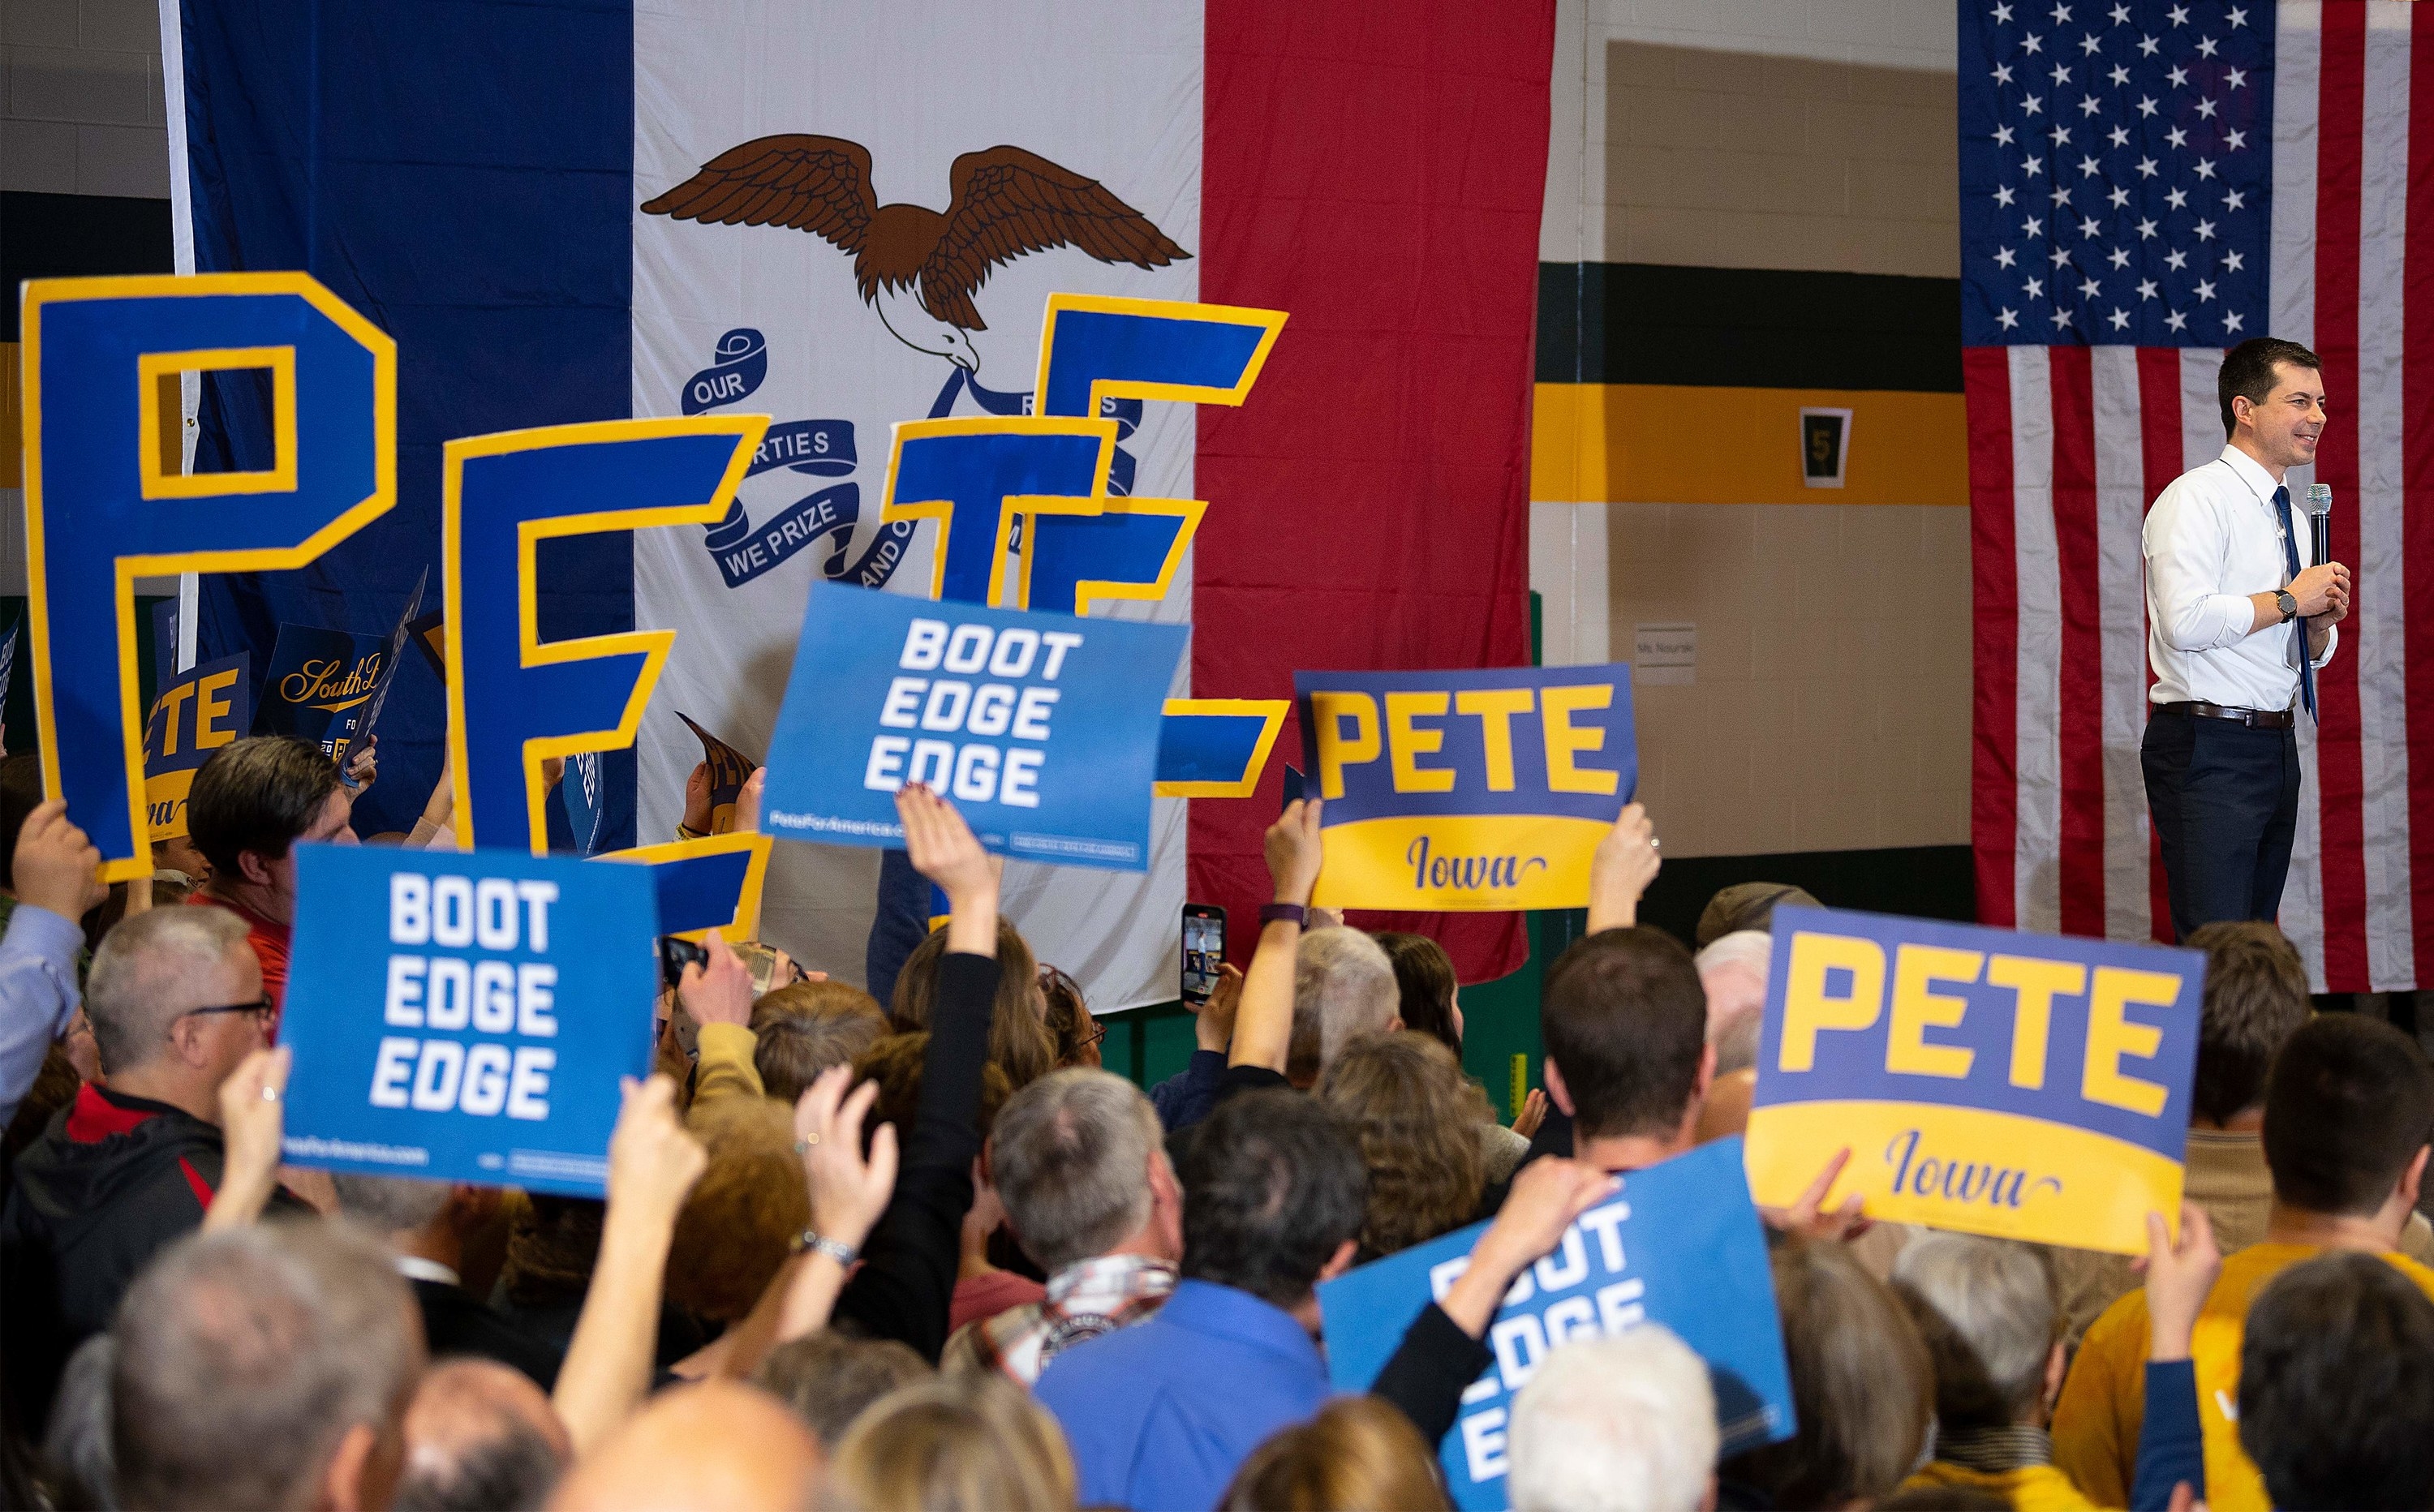 Pete speaking onstage during a campaign stop